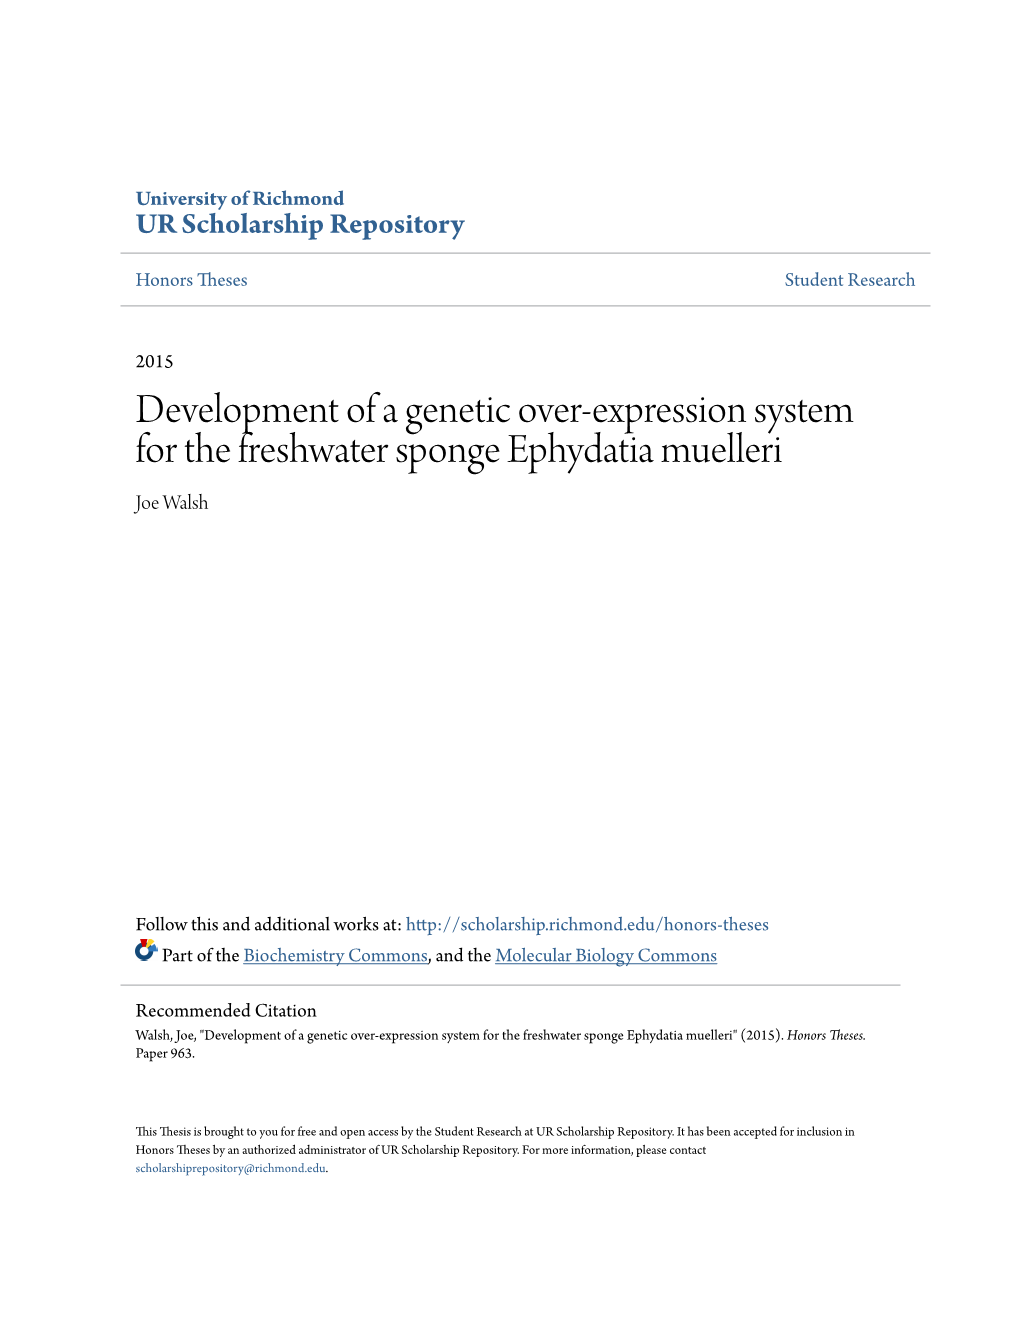 Development of a Genetic Over-Expression System for the Freshwater Sponge Ephydatia Muelleri Joe Walsh